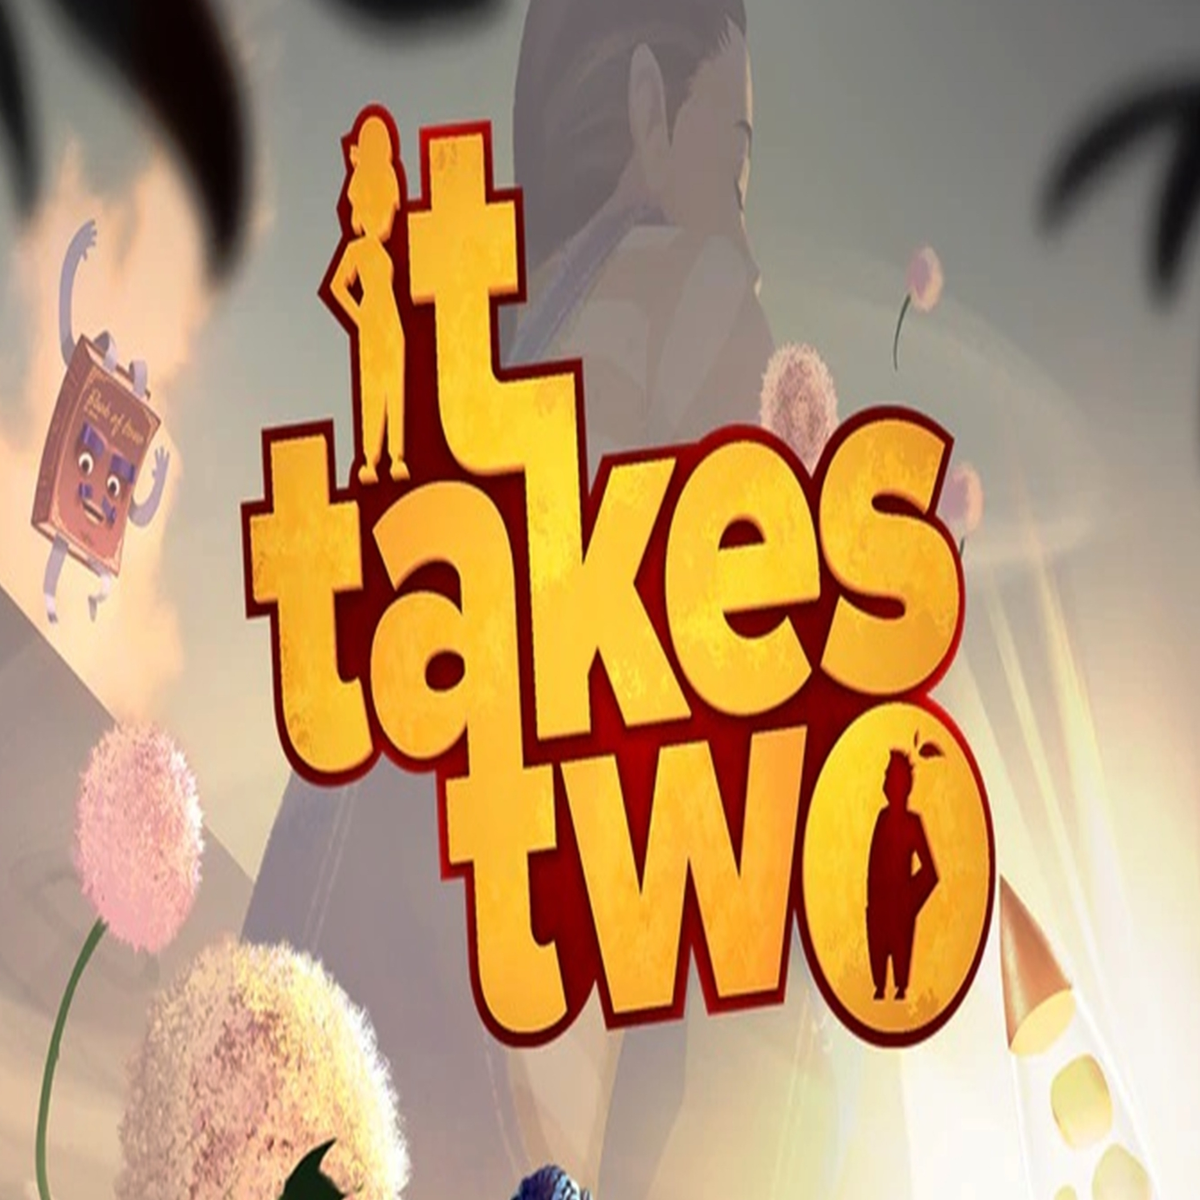 Replying to @reepicheep1010 2021: It Takes Two #gaming #ittakestwo #go